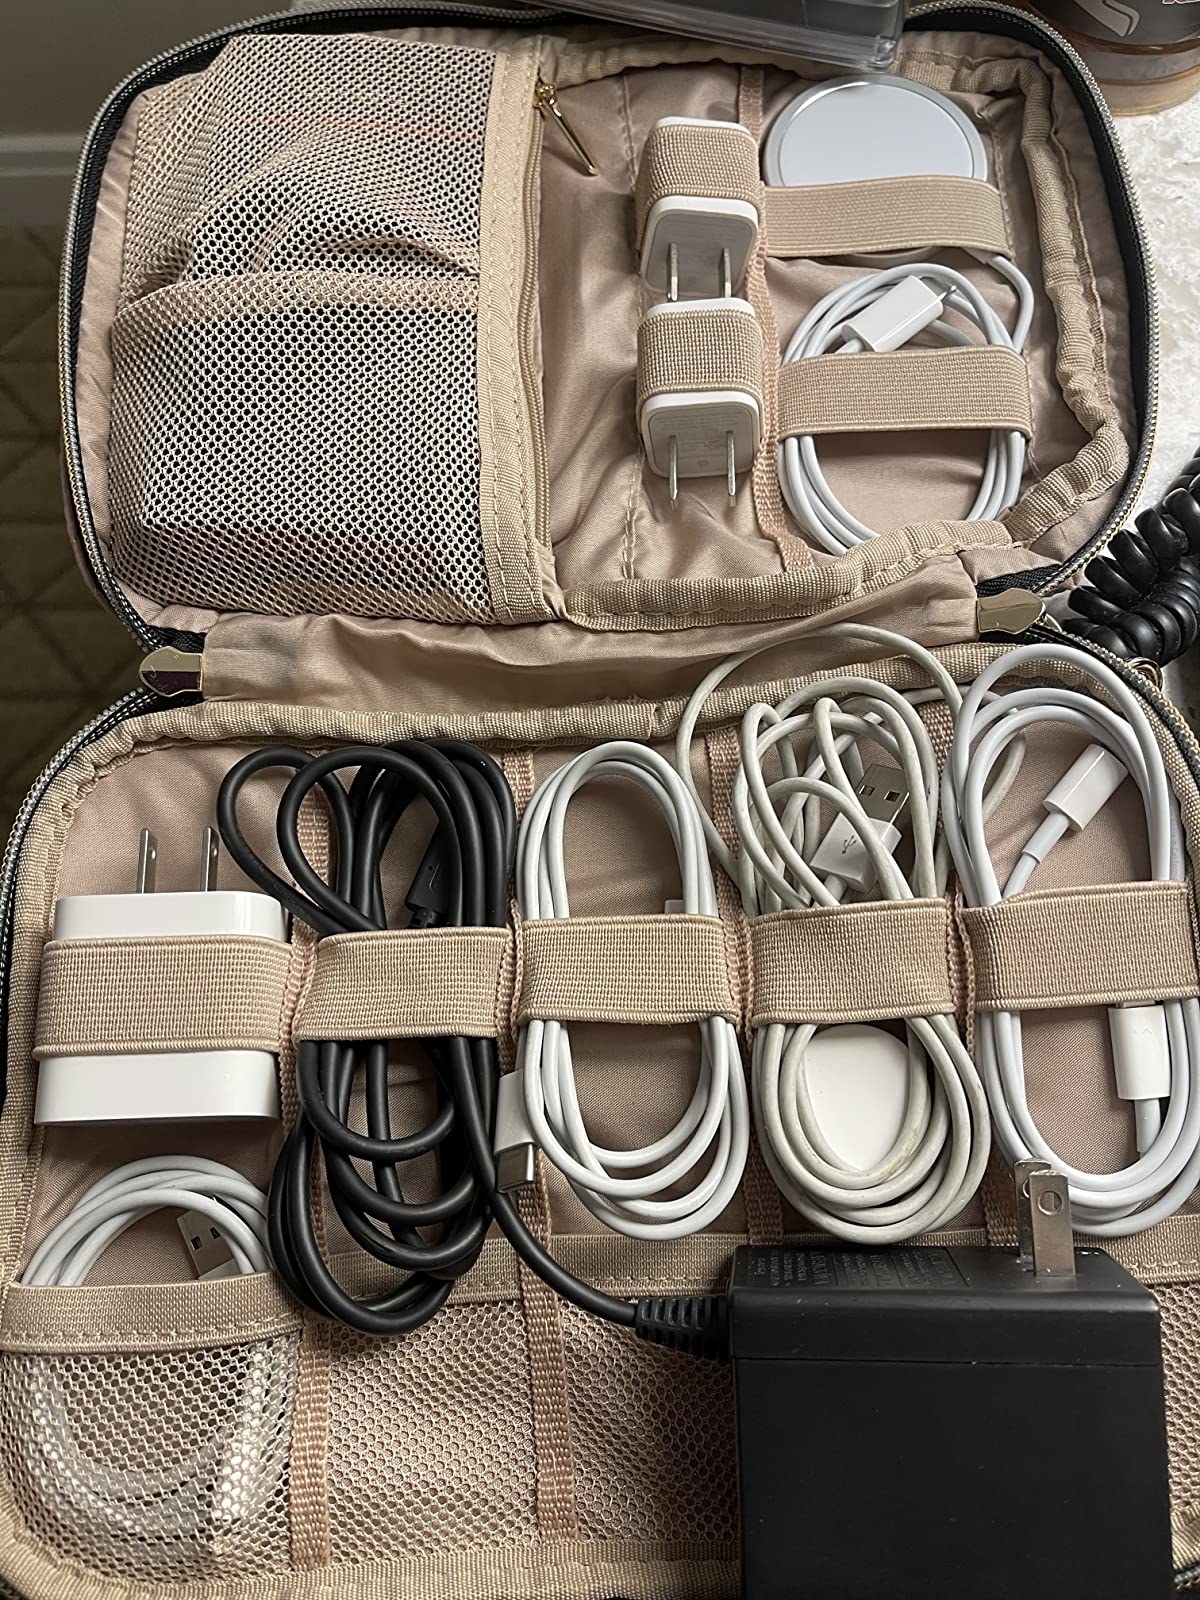 Reviewer image of organizer filled with cables and chargers